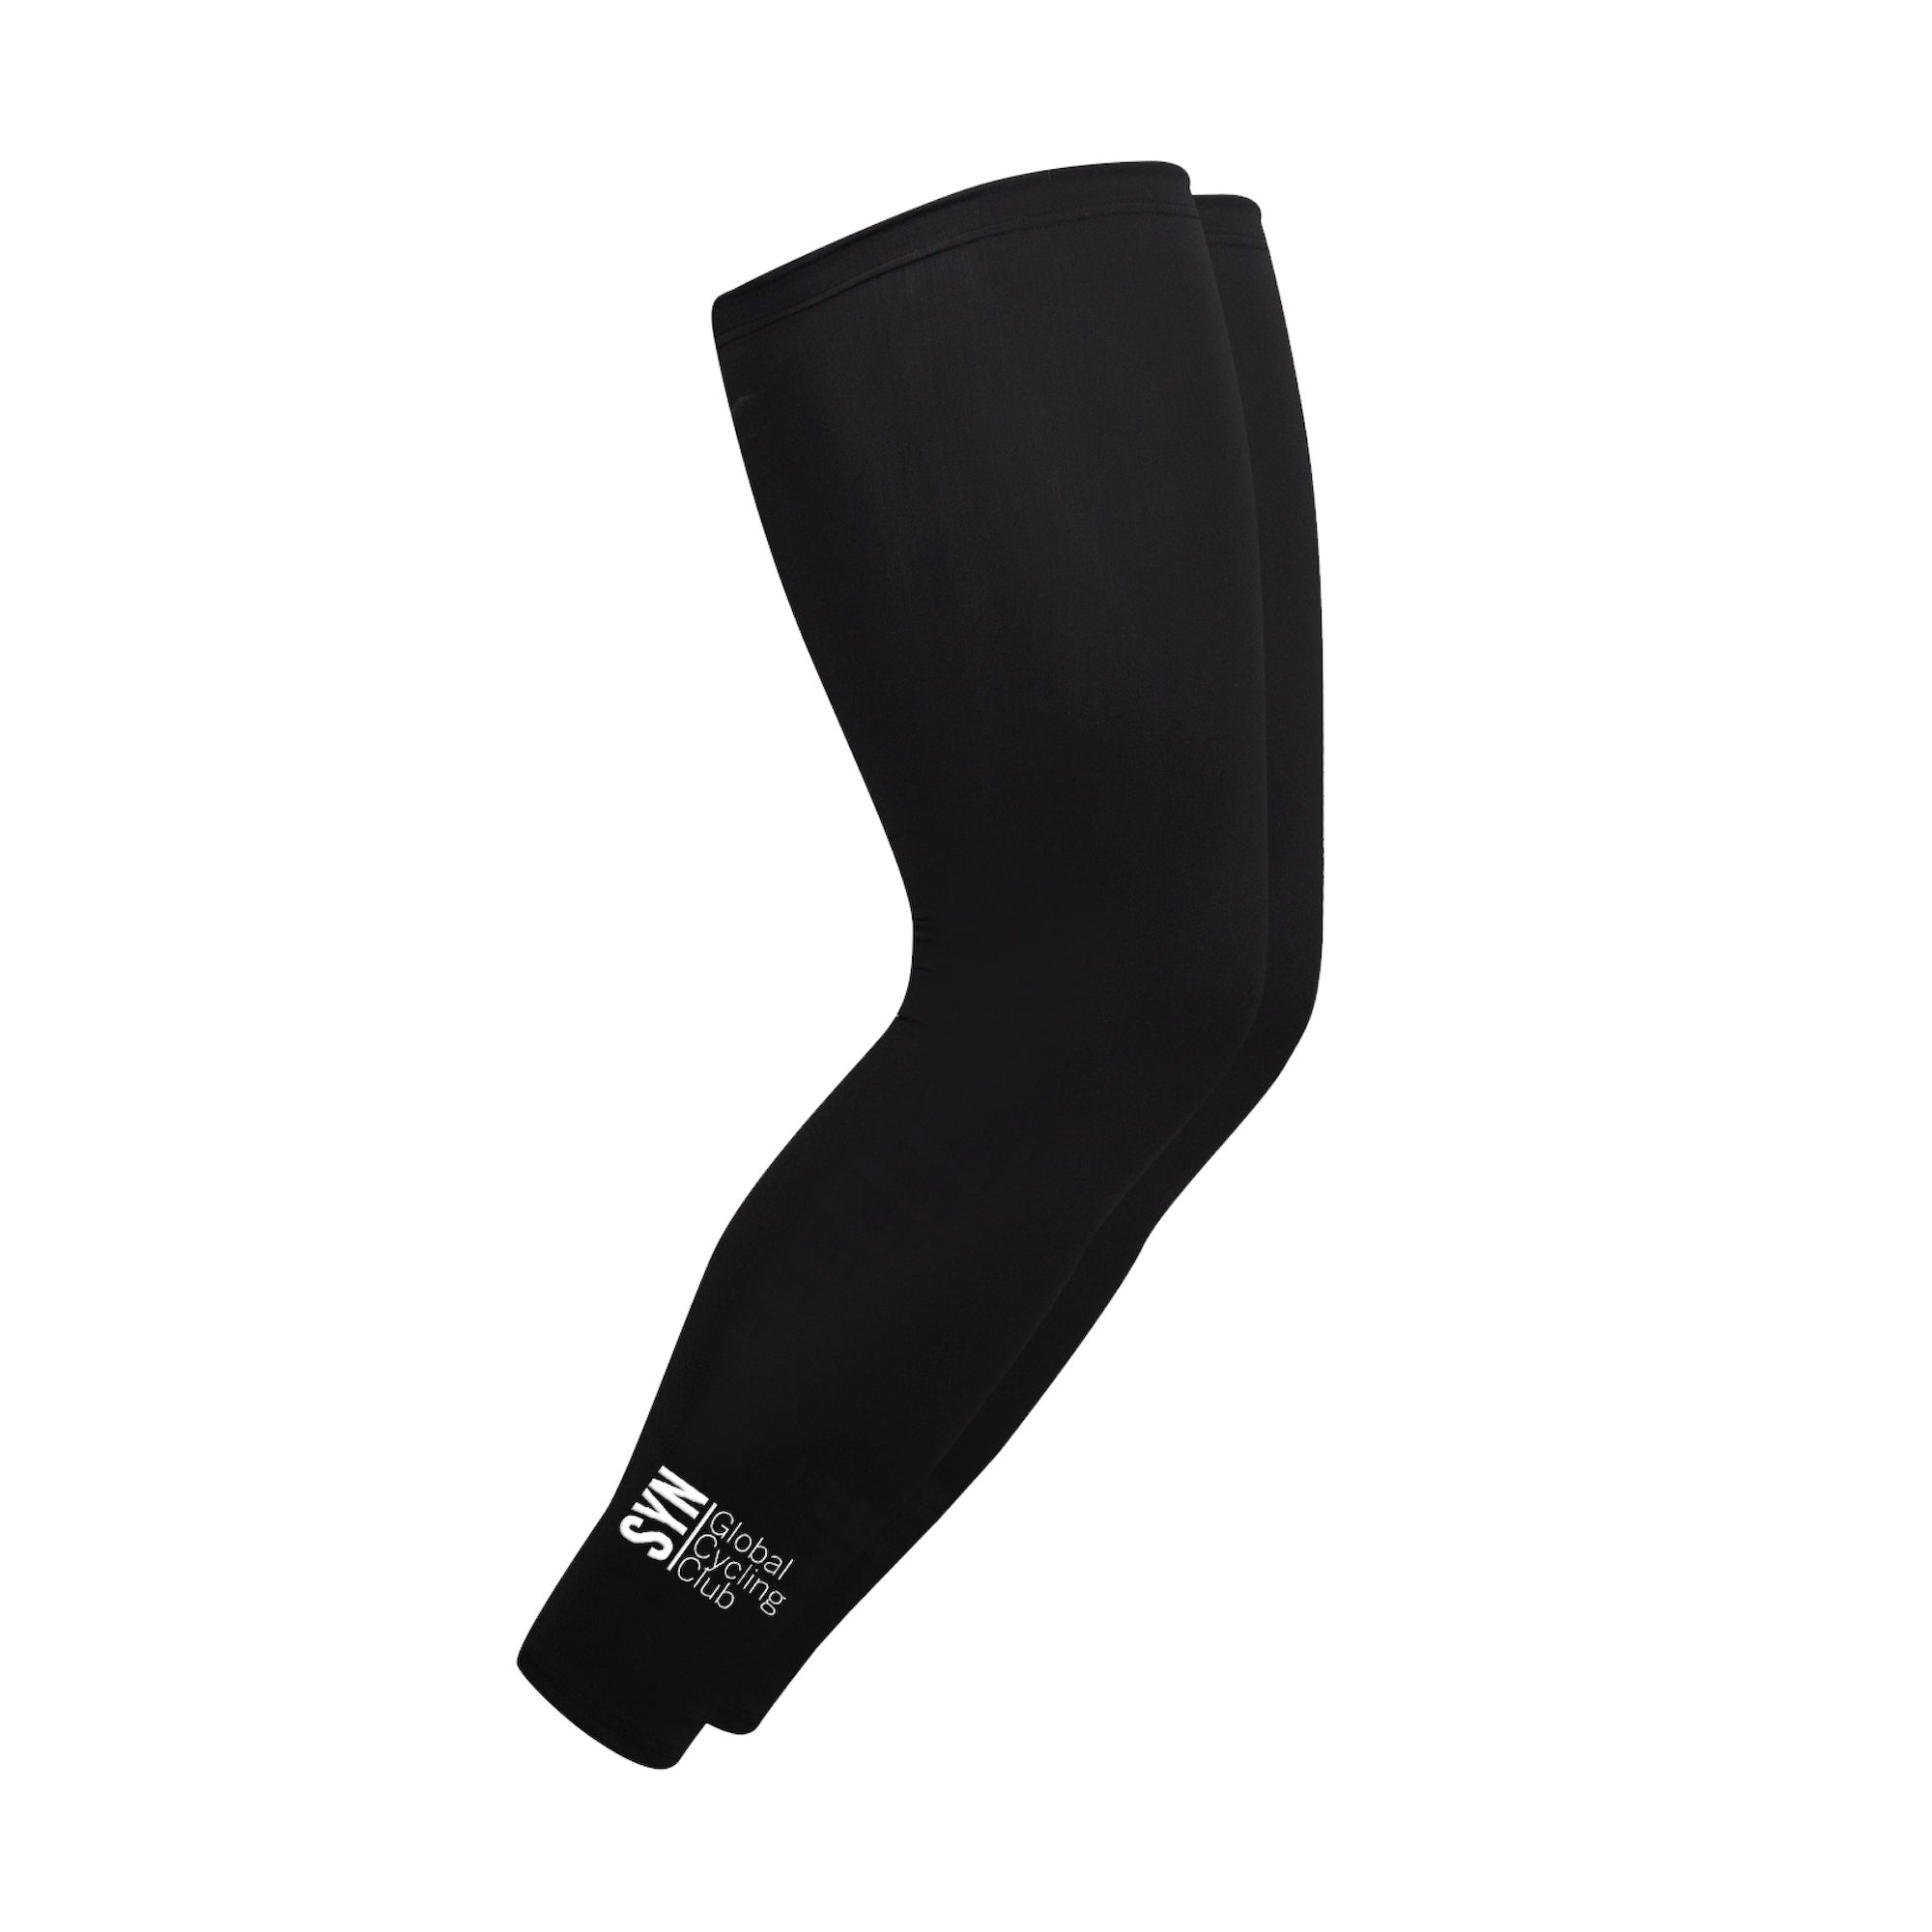 Syndicate Thermal Leg Warmers